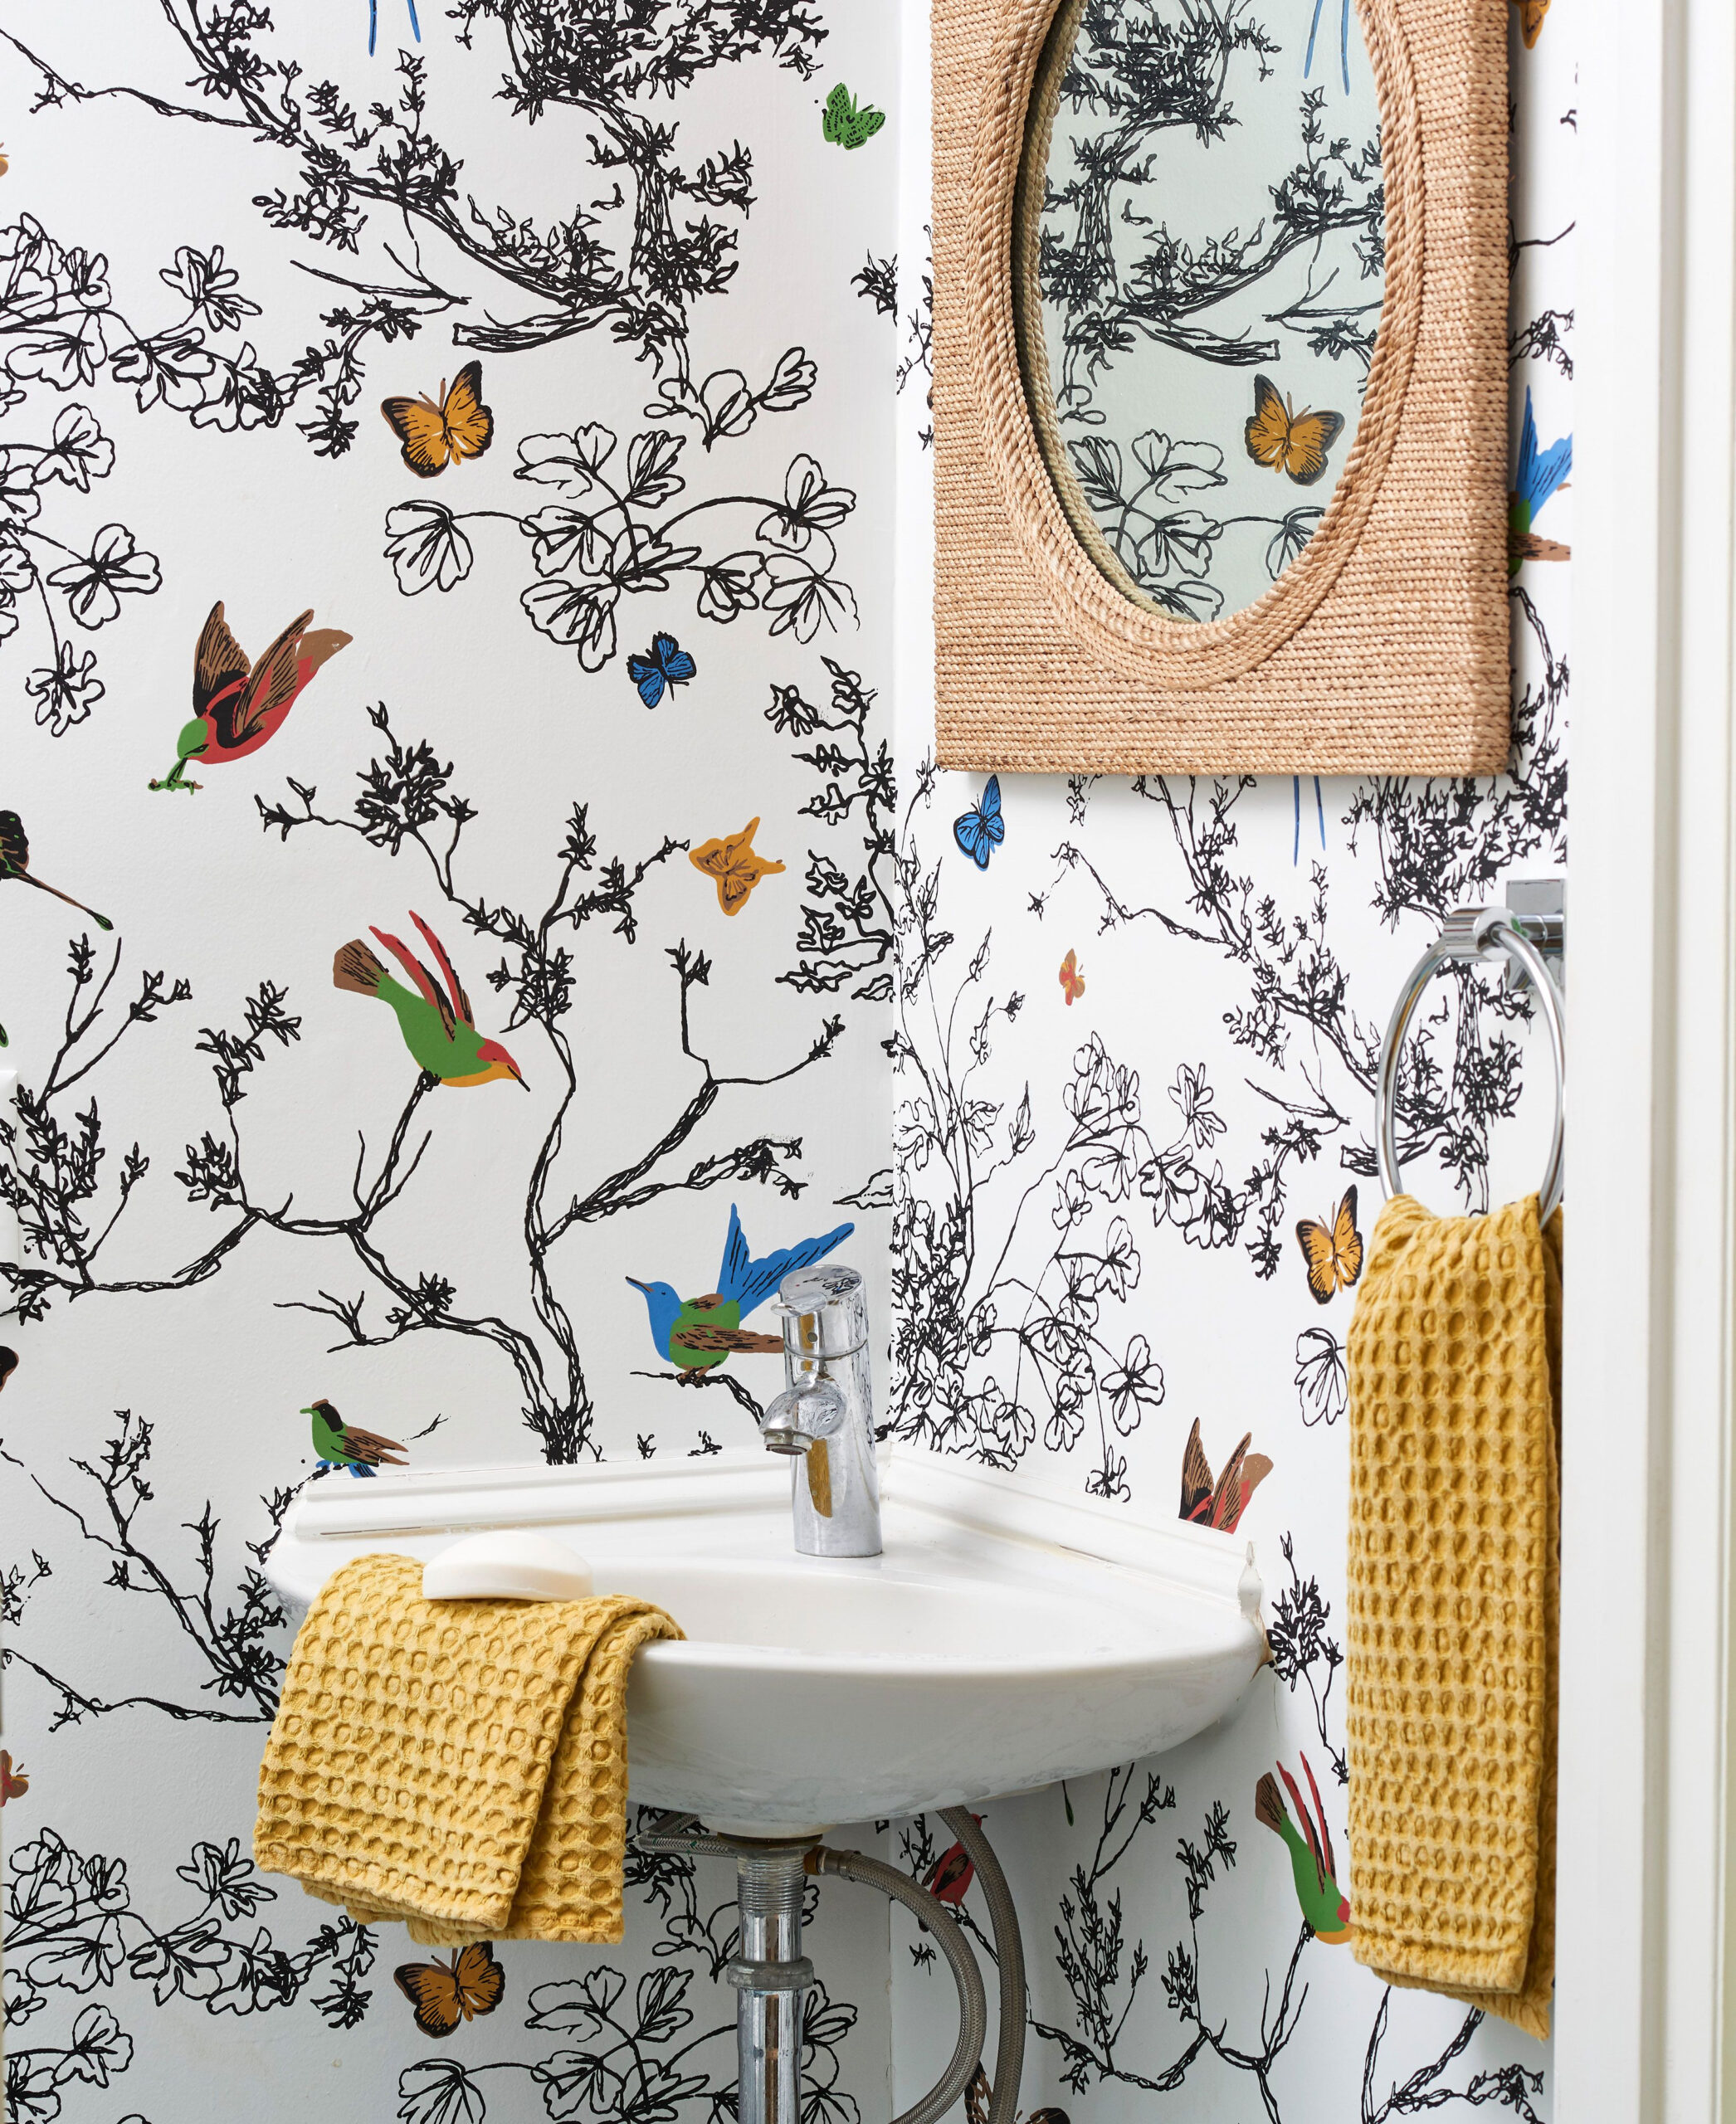 Bathroom Wallpaper Ideas That Add Pattern and Color to Your Space